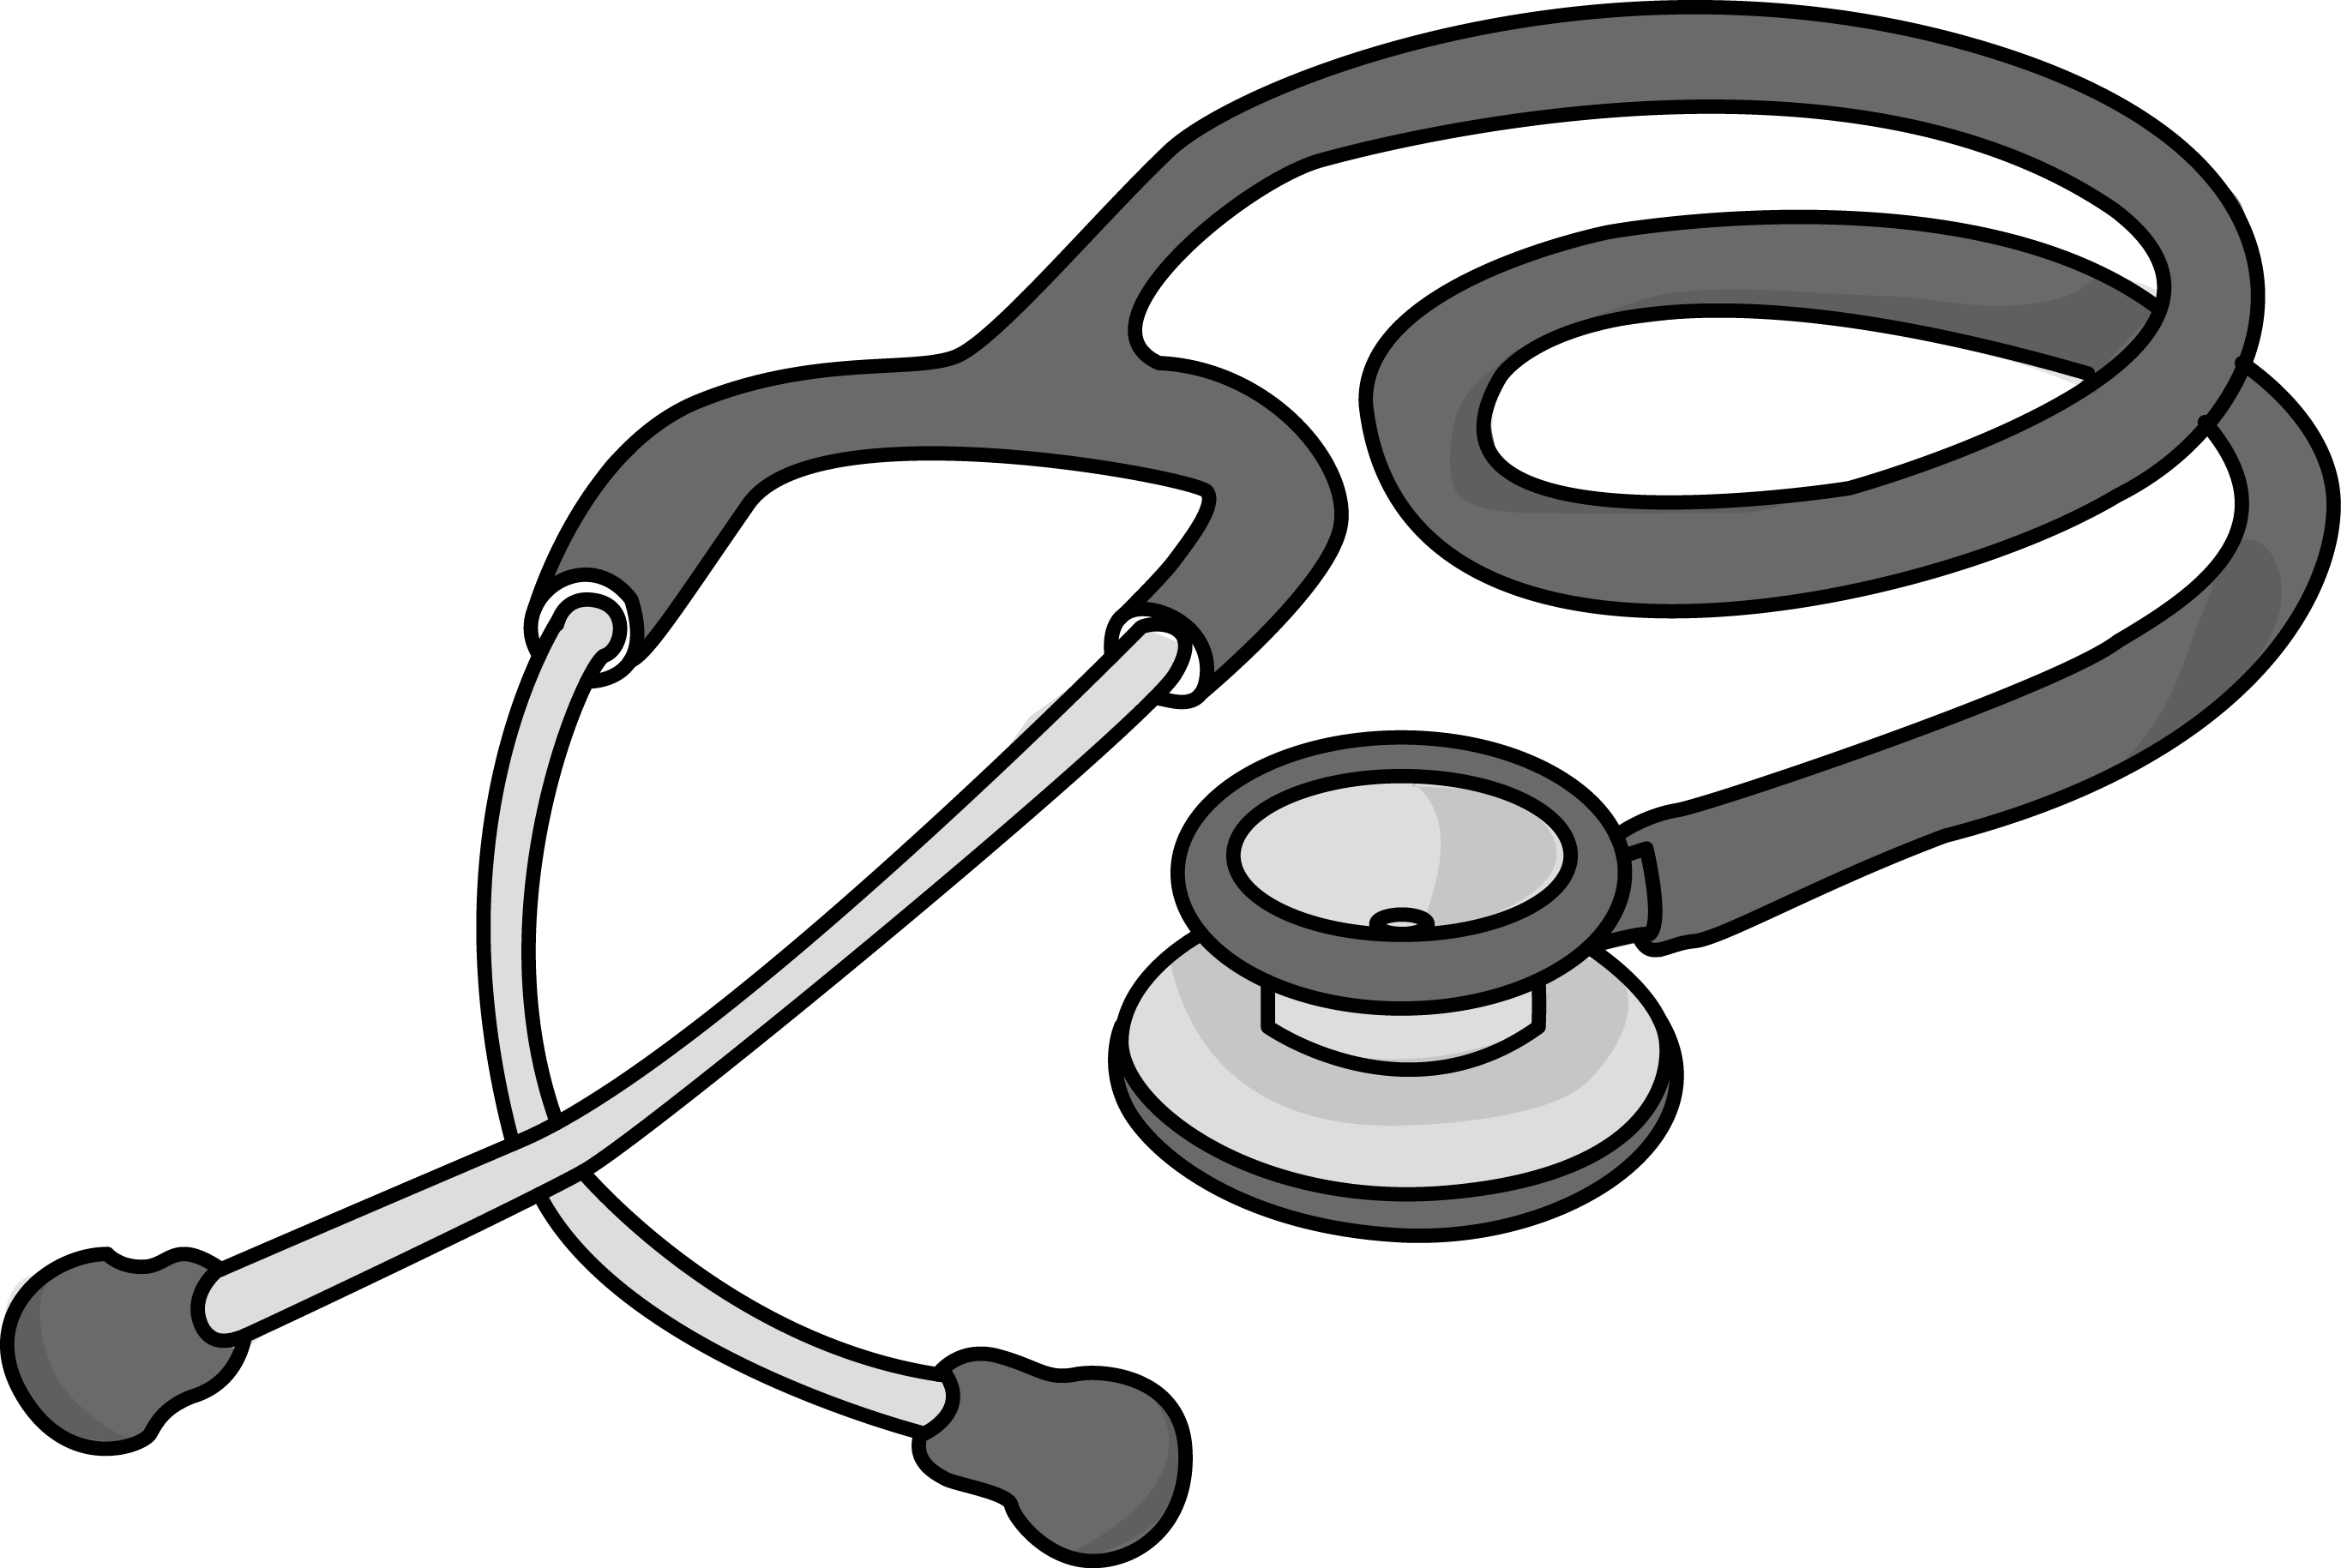 Stethoscope clipart .